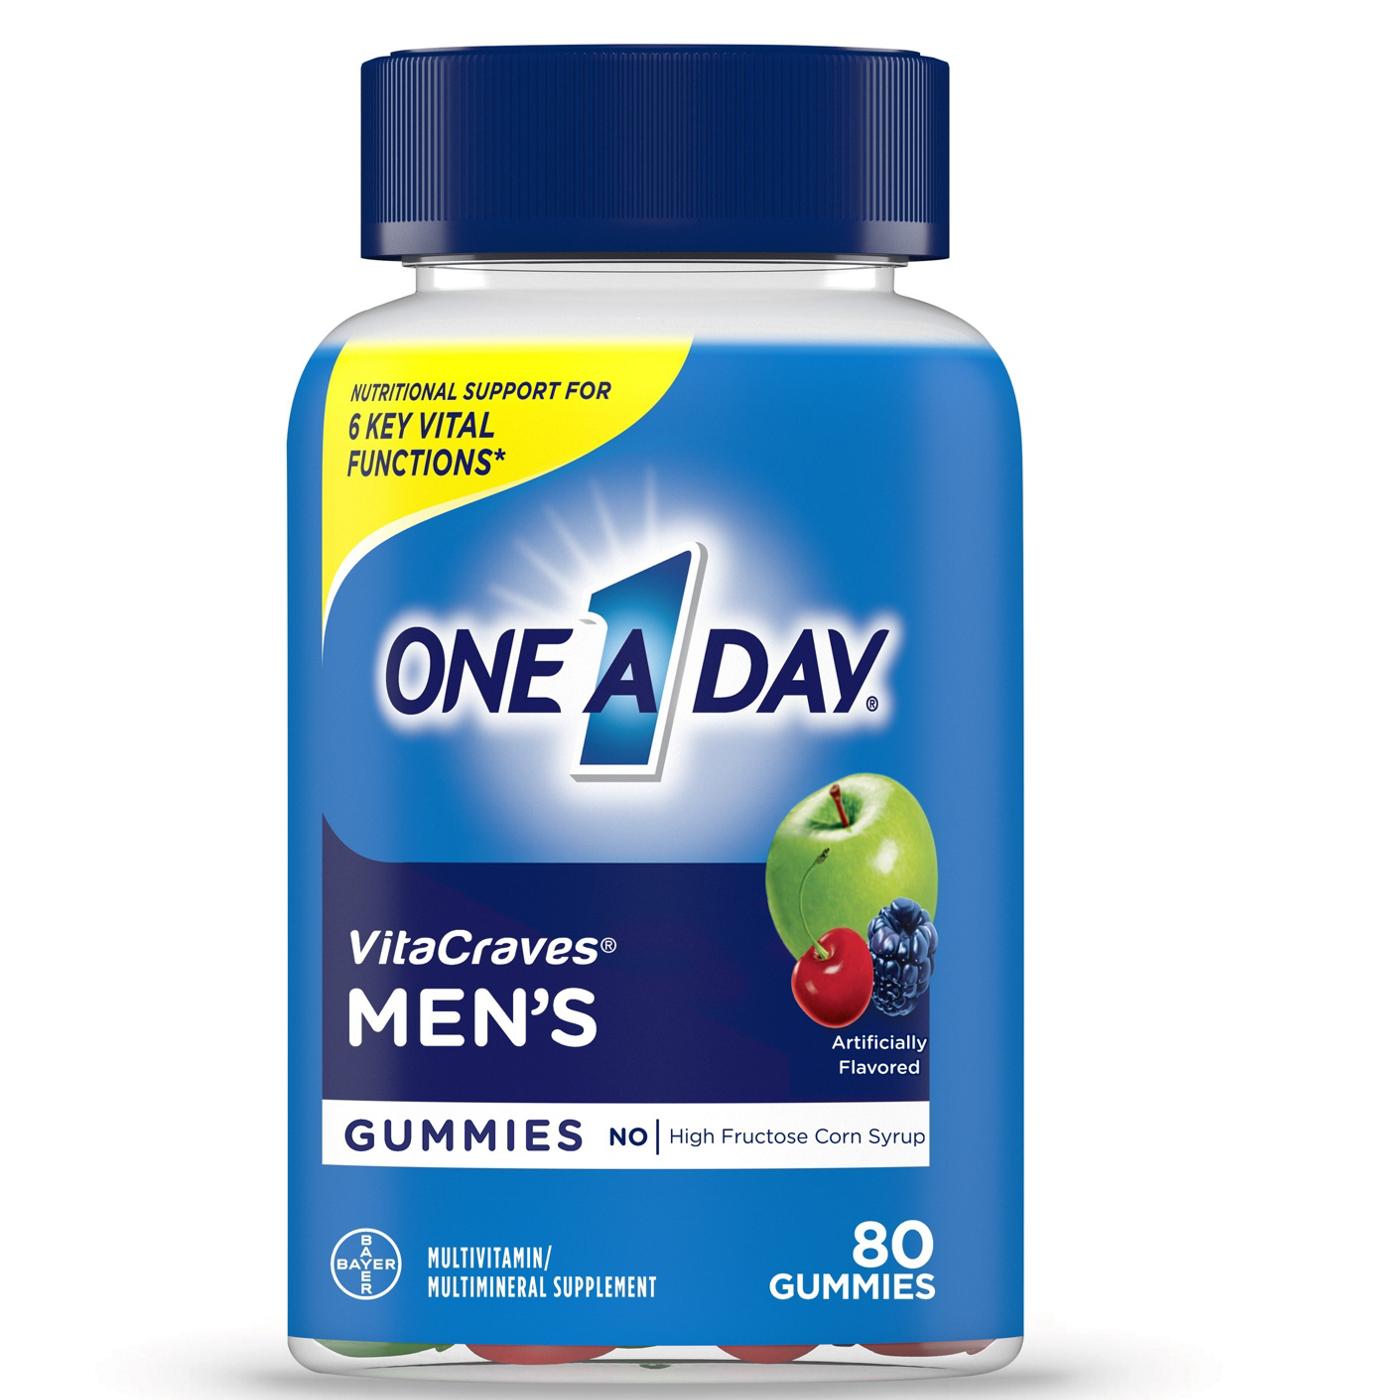 One A Day VitaCraves Men's Multivitamin Gummies; image 1 of 5